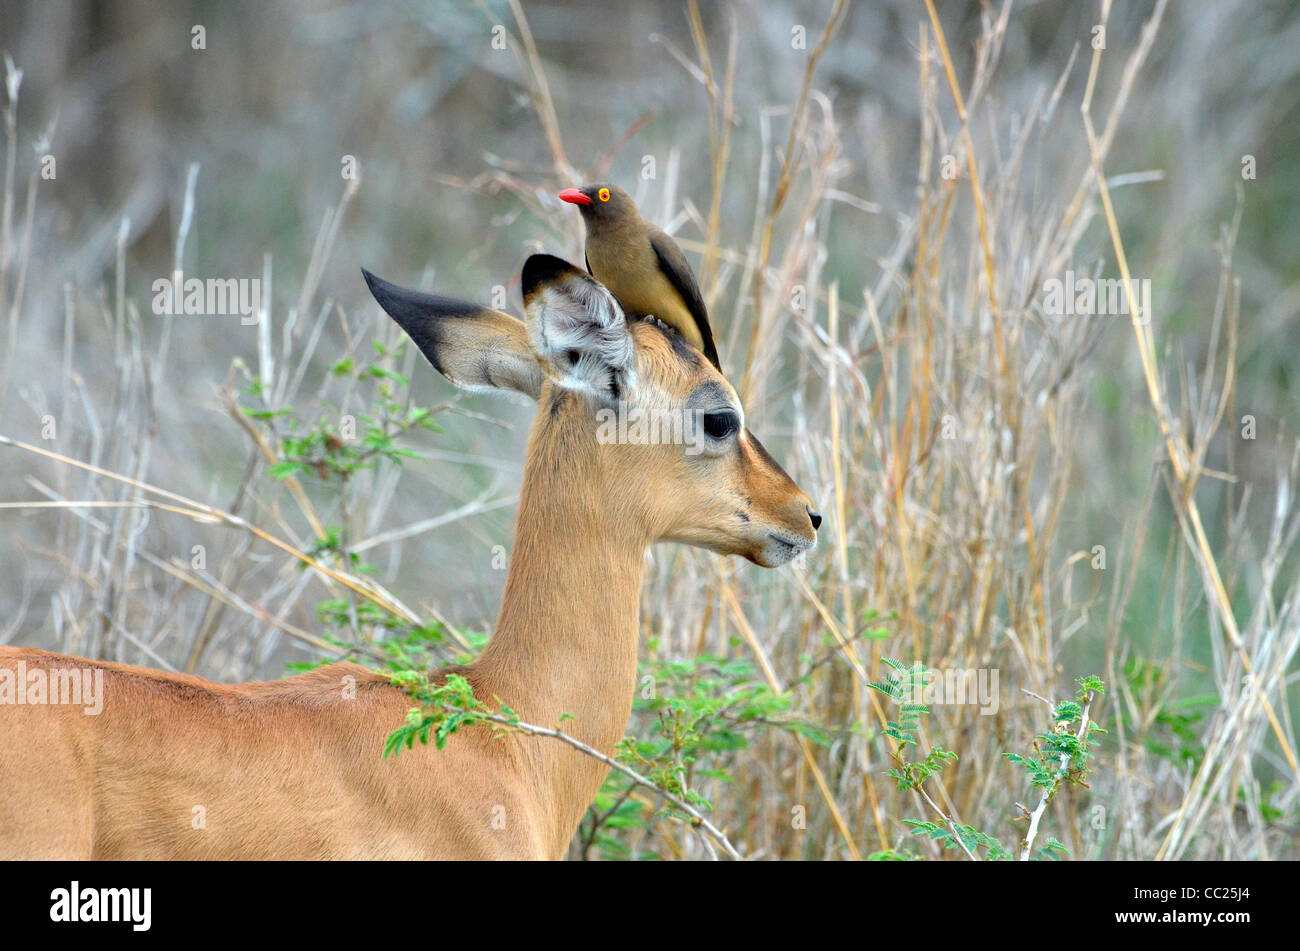 Kruger national Park in South Africa, world famous for game viewing at affordable rates. Baby impala with oxpeckecker on head Stock Photo